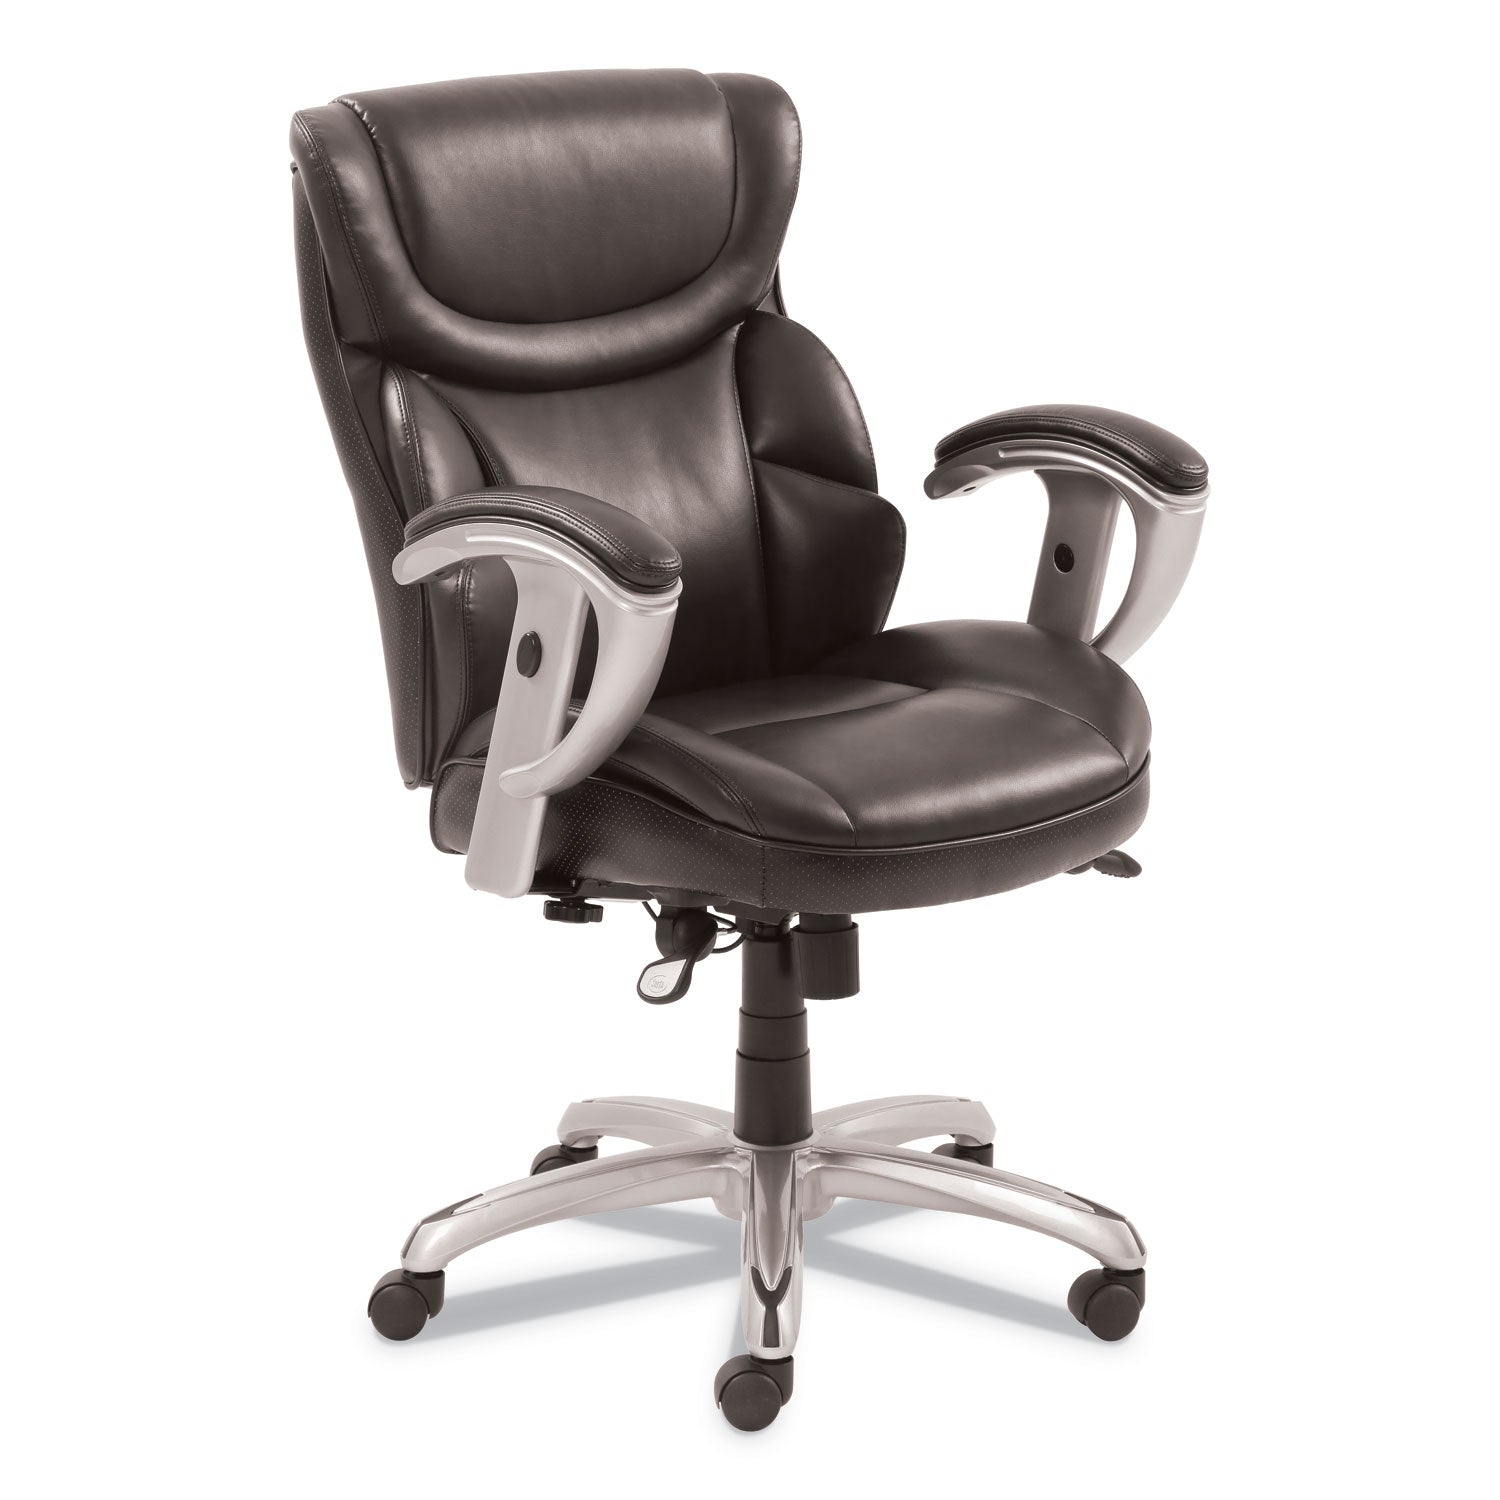 emerson-task-chair-supports-up-to-300-lb-1875-to-2175-seat-height-brown-seat-back-silver-base_srj49711brw - 1